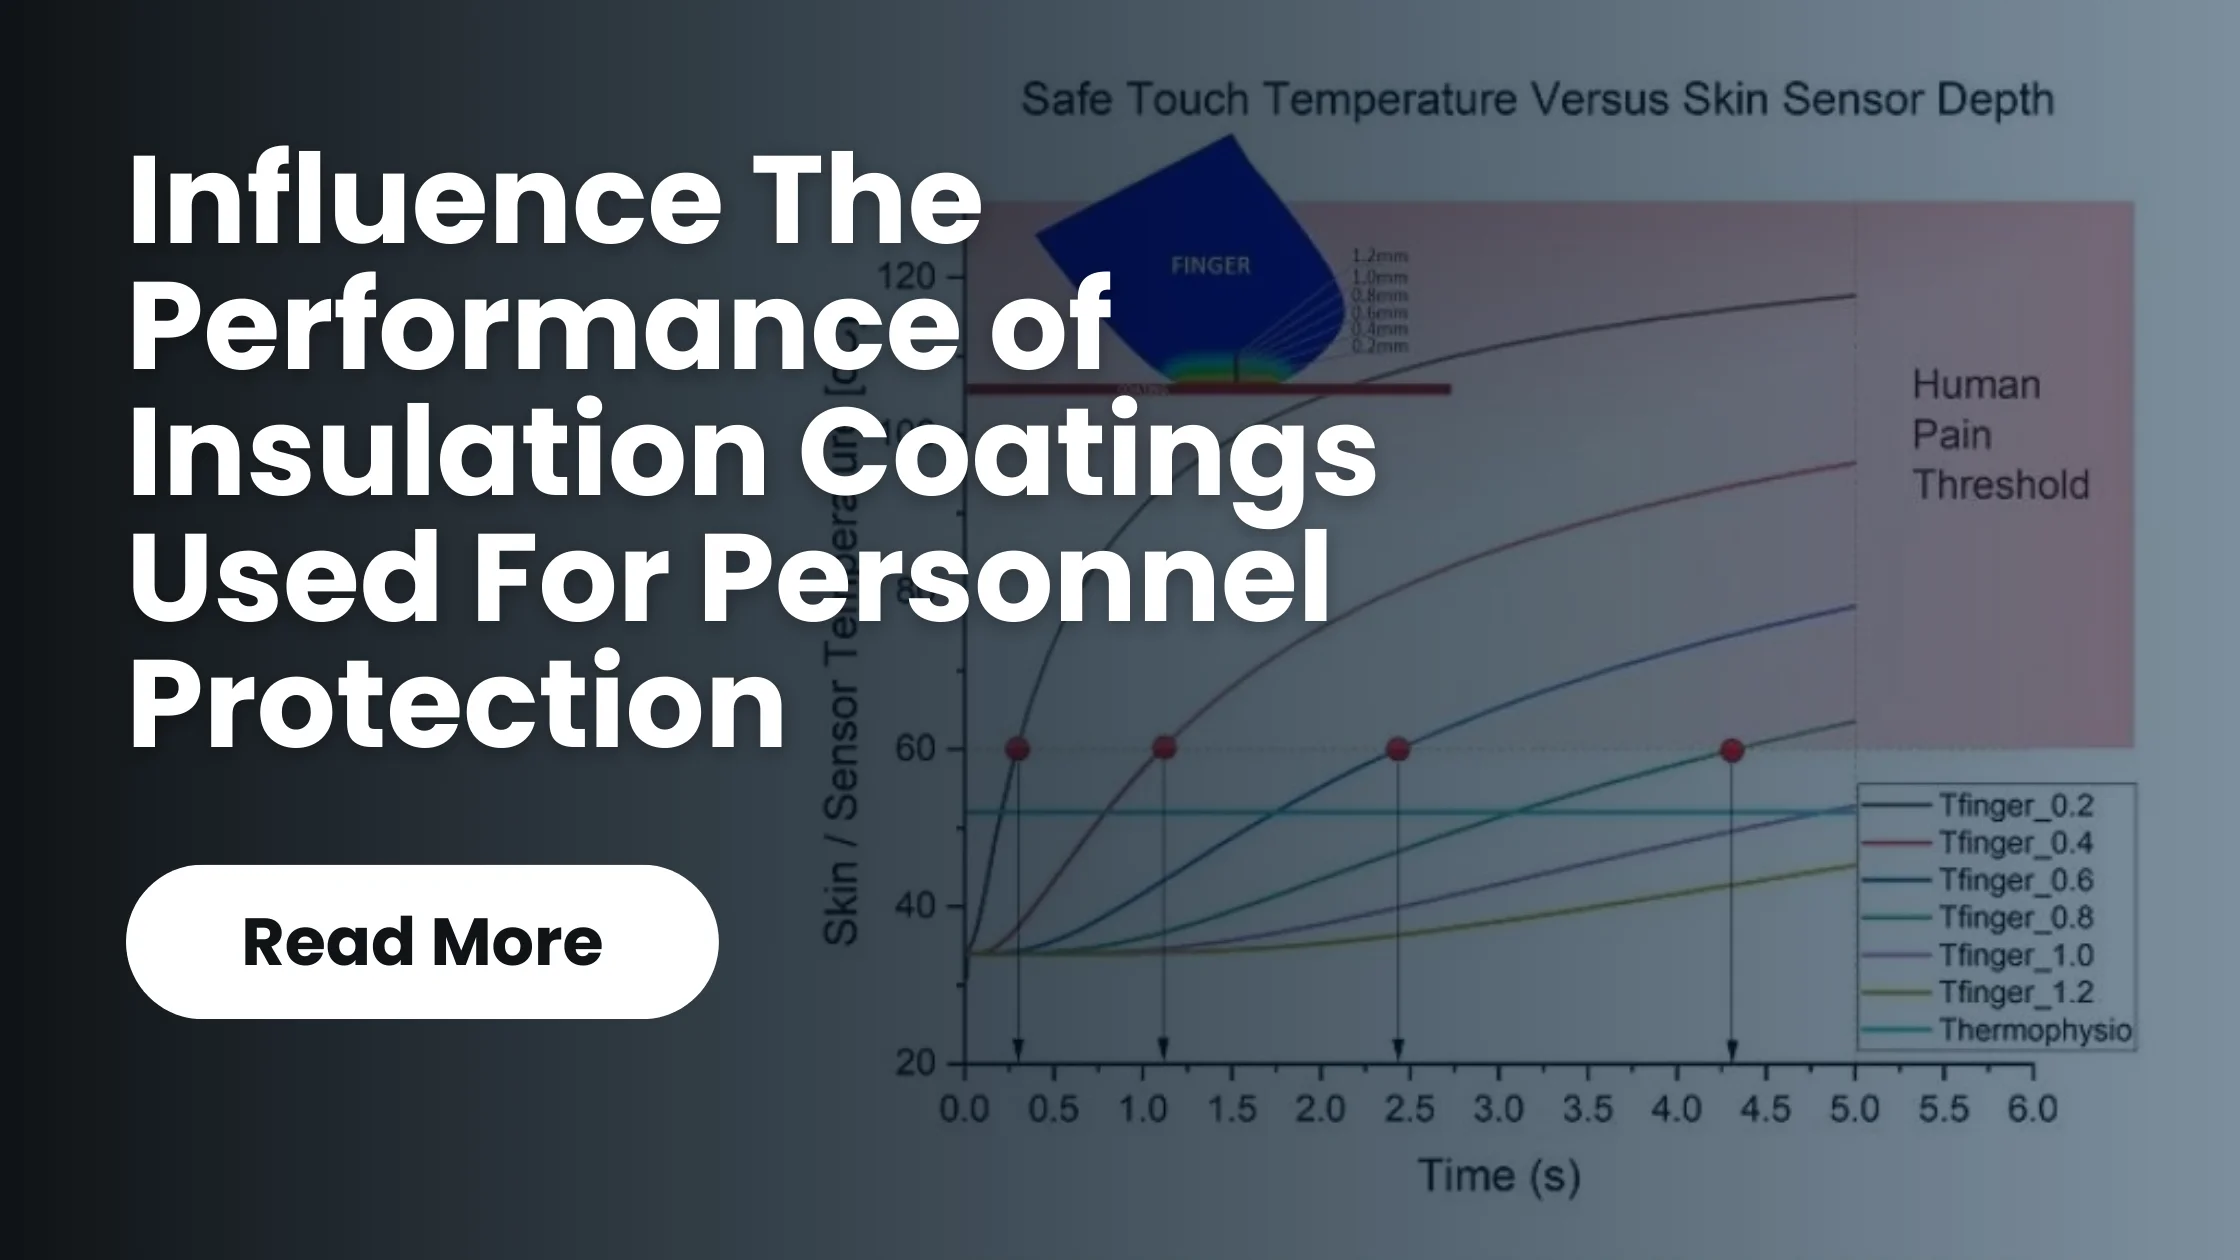 The Thermal Properties That Influence The Performance of Insulation Coatings Used For Personnel Protection